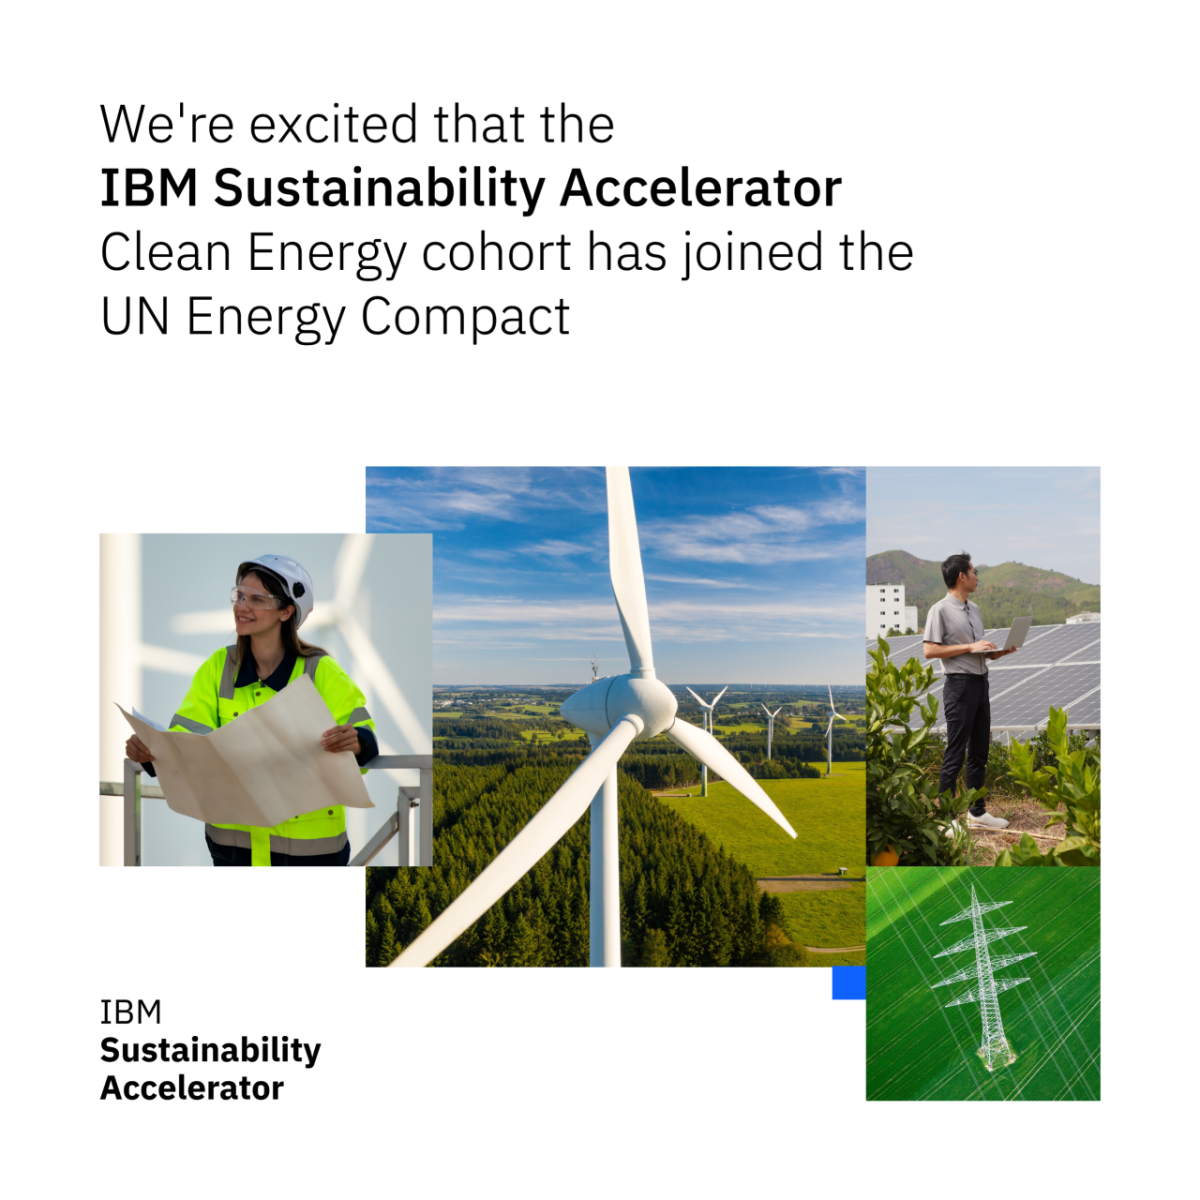 We're excited that the IBM Sustainability Accelerator Clean Energy cohort has joined the UN Energy Compact